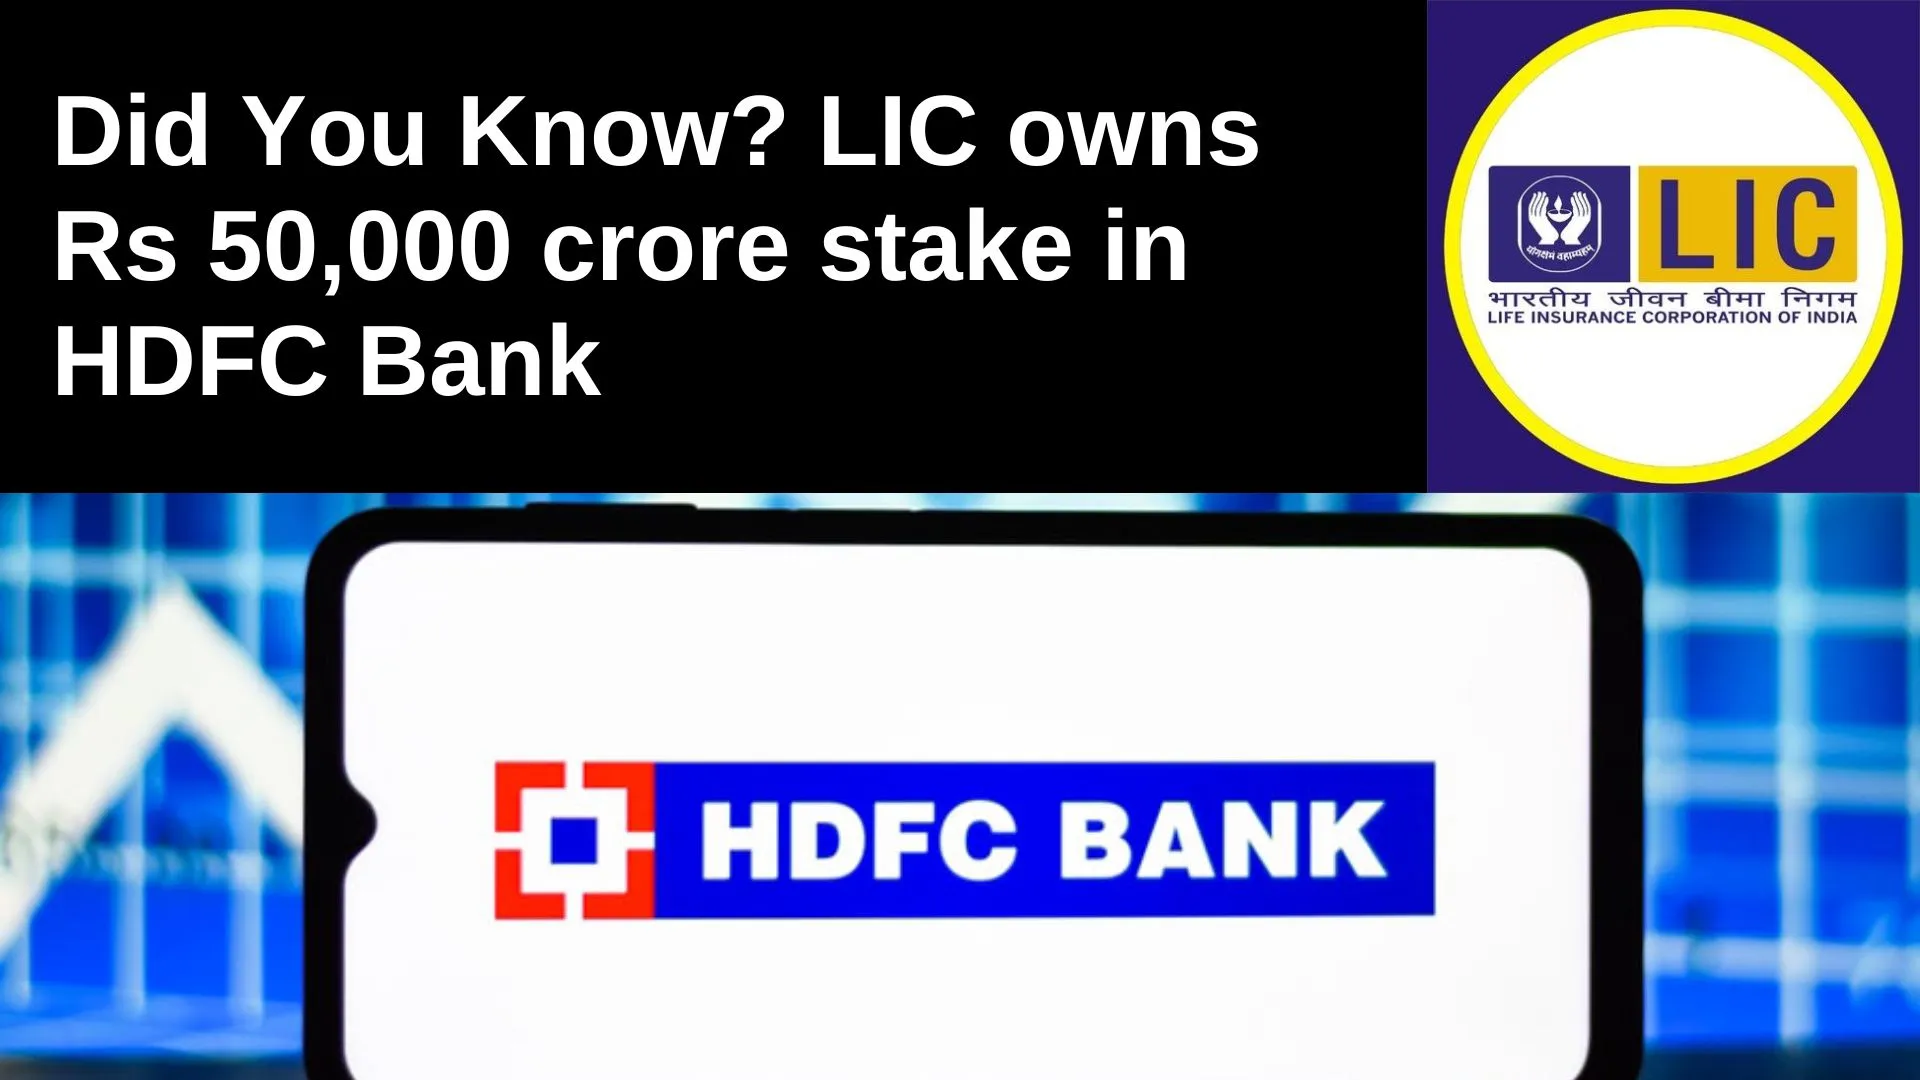 Did You Know Lic Owns Rs 50000 Crore Stake In Hdfc Bank Hellobanker 4762